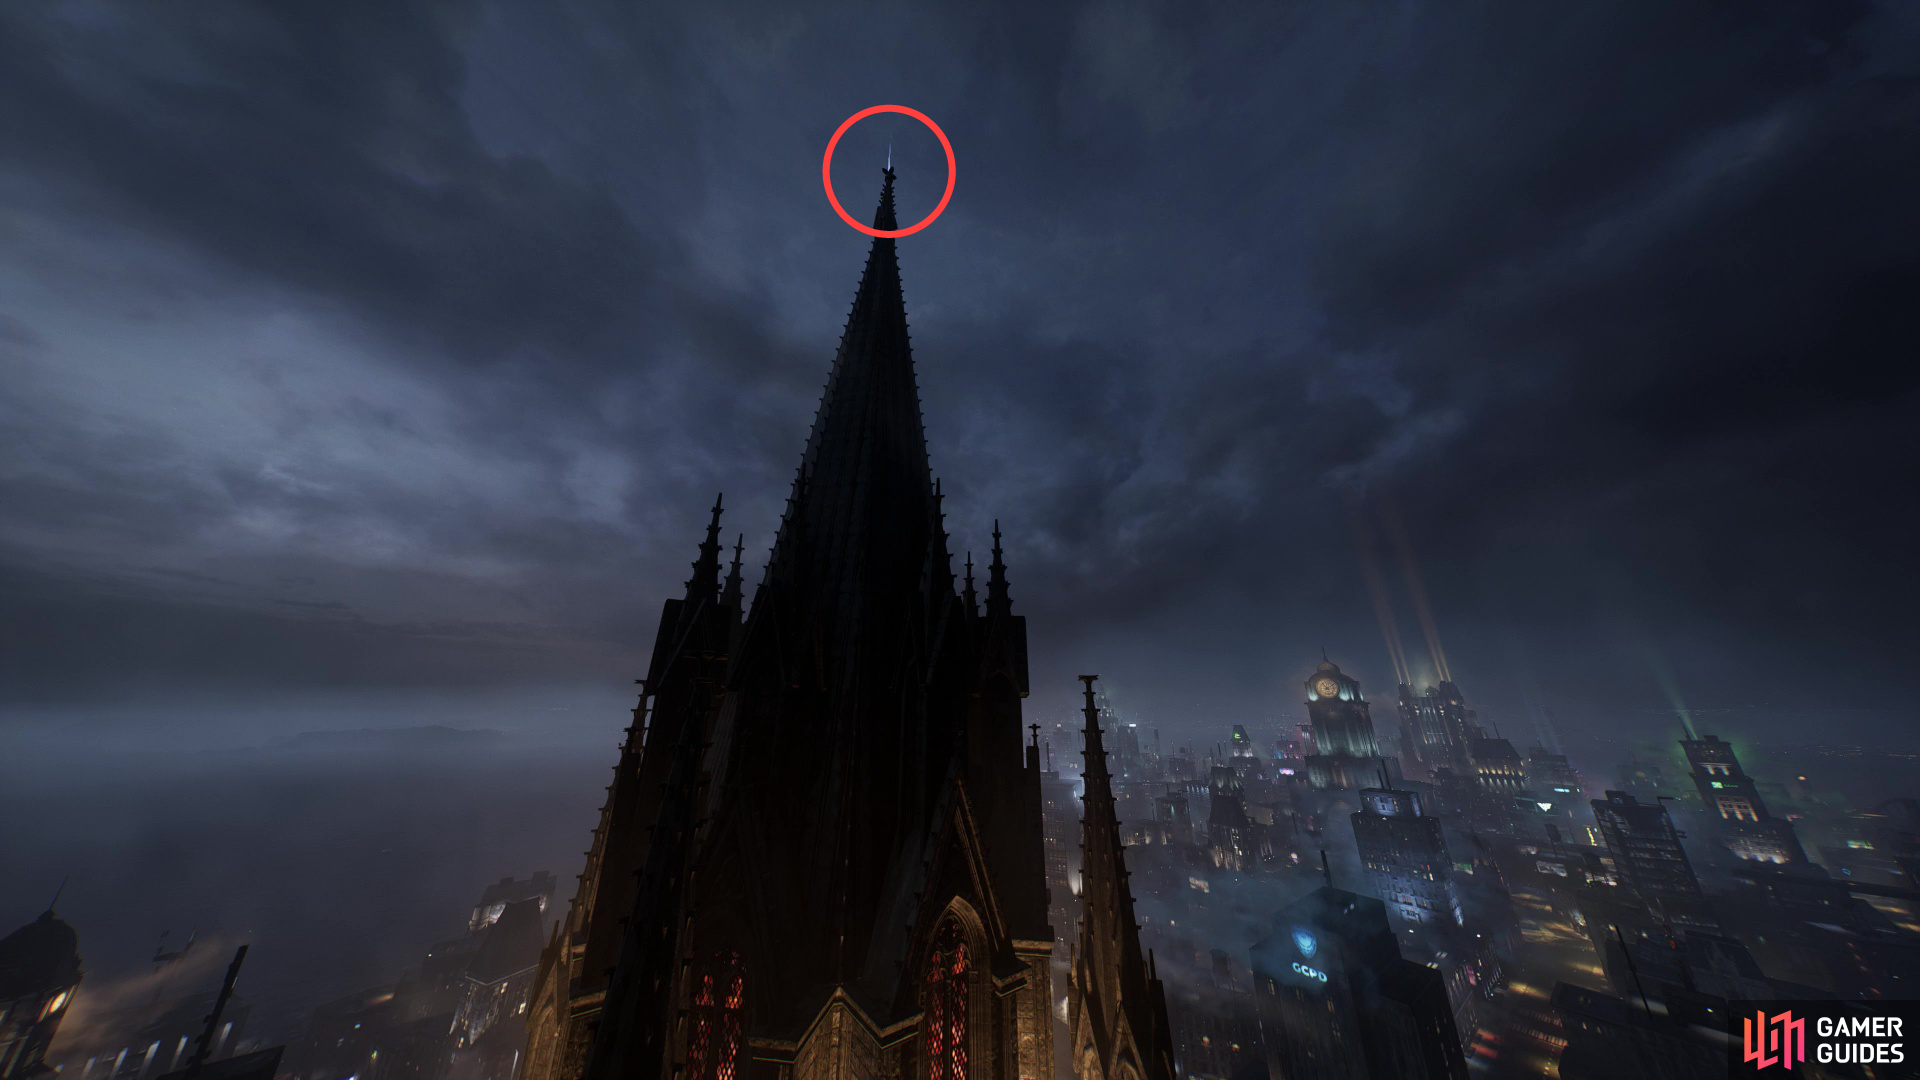 You can find a Batarang hidden atop the tallest spire of the Gotham Cathedral.